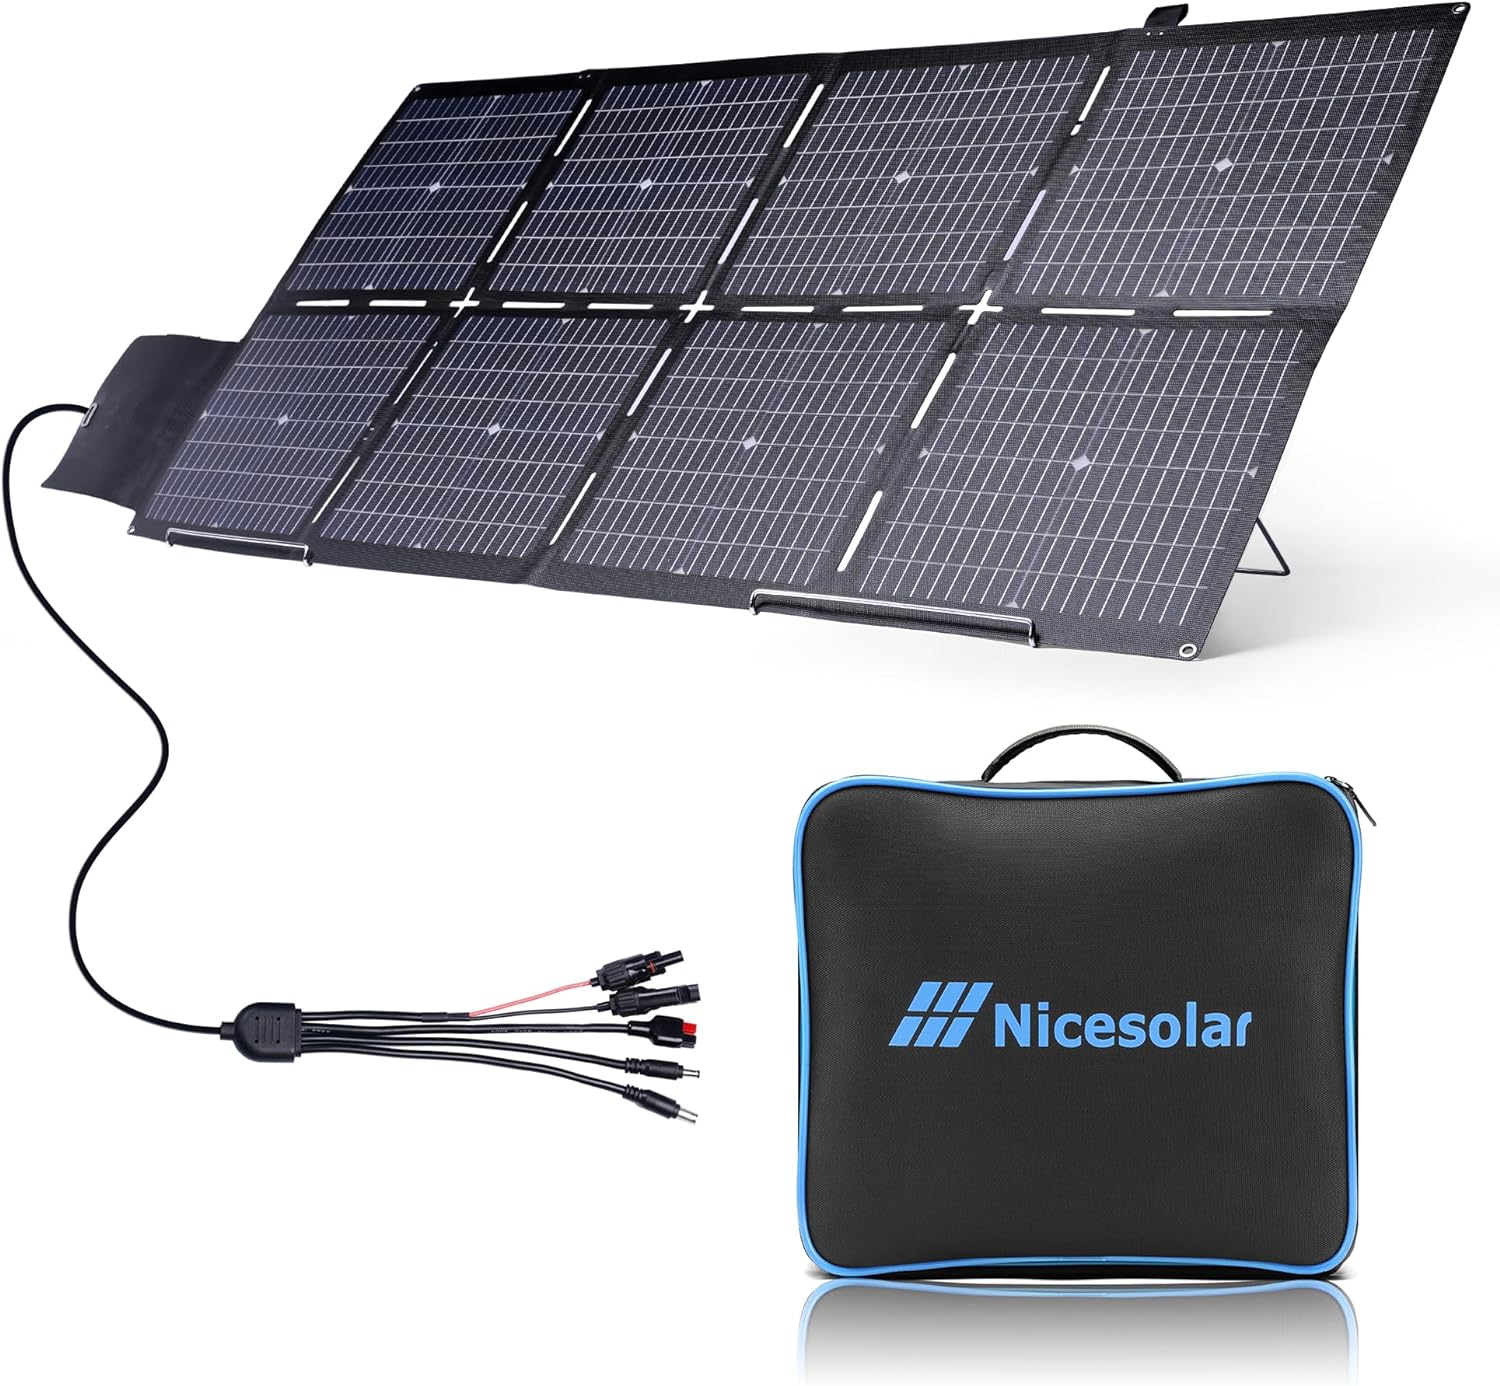 Nicesolar 200W Bifacial Portable Solar Panel Foldable Solar Charger for Portable Power Station Solar Generator with USB AC PD 65W for Laptop Smartphone Tablet Powerbank Outdoor Camping Van RV - Foldable Solar Charger Review